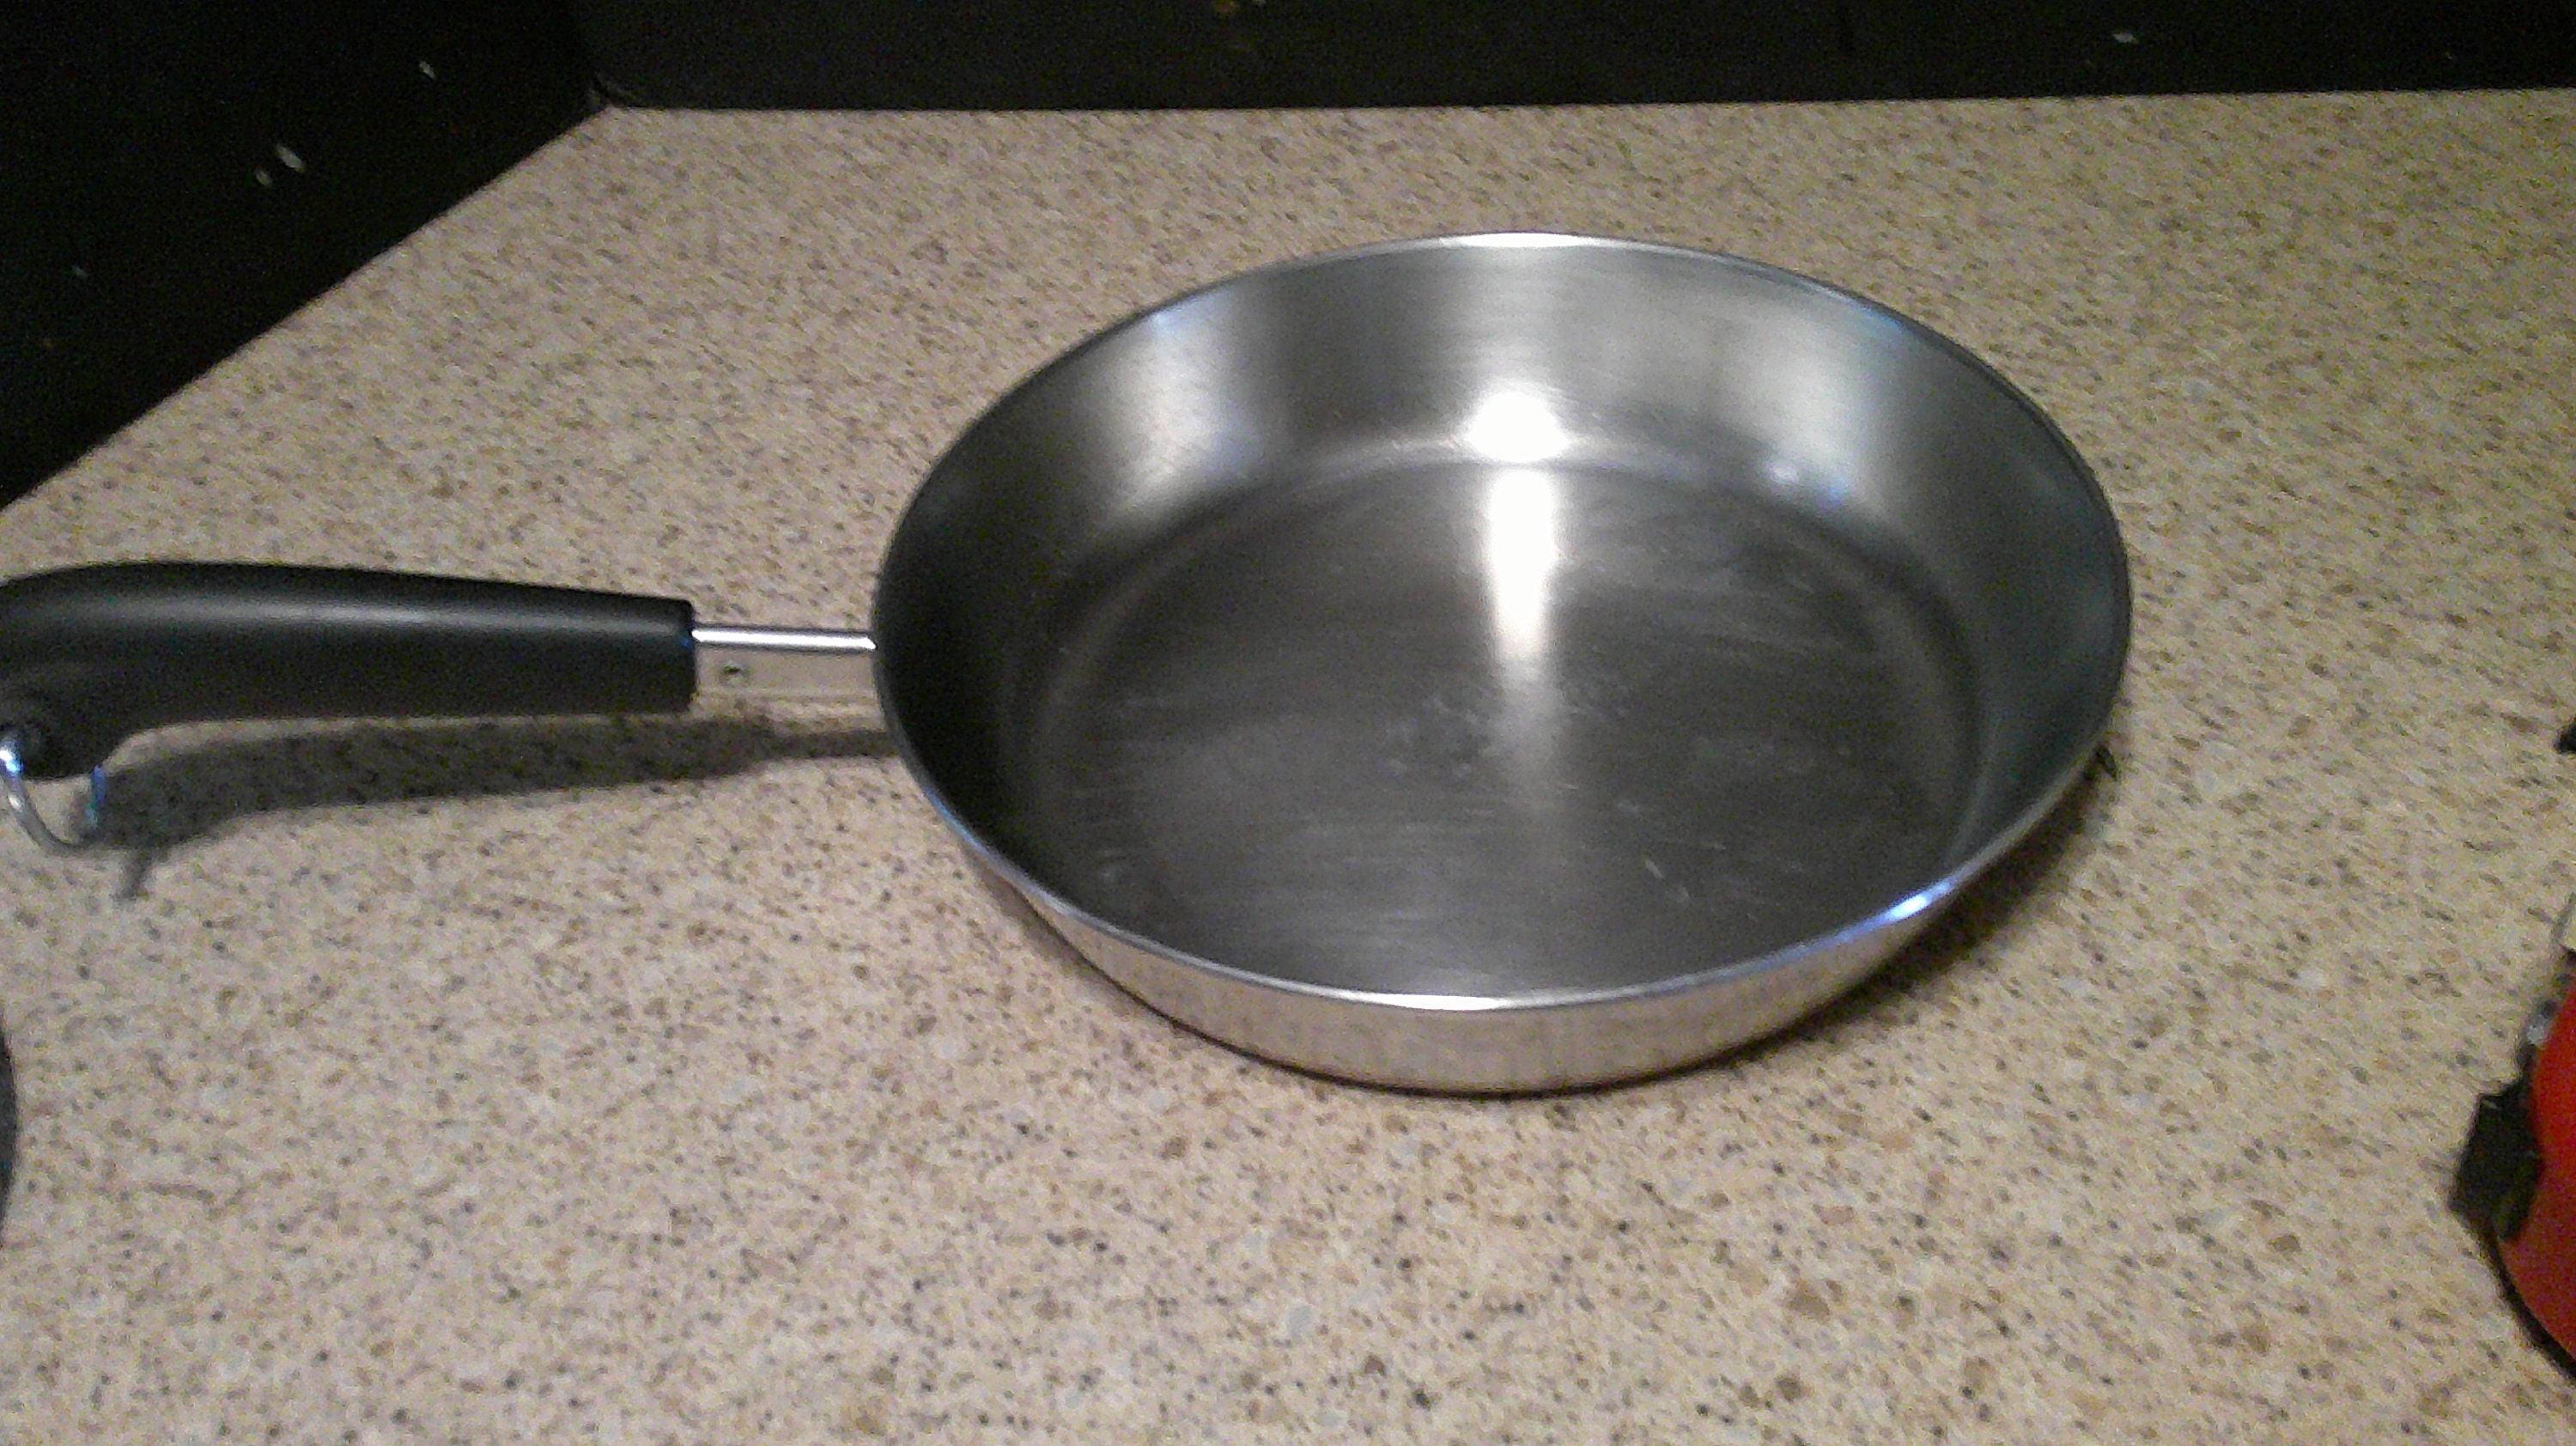 Large 12 Inch Replacement Lid For Revere Ware Copper Clad Skillet - Ruby  Lane